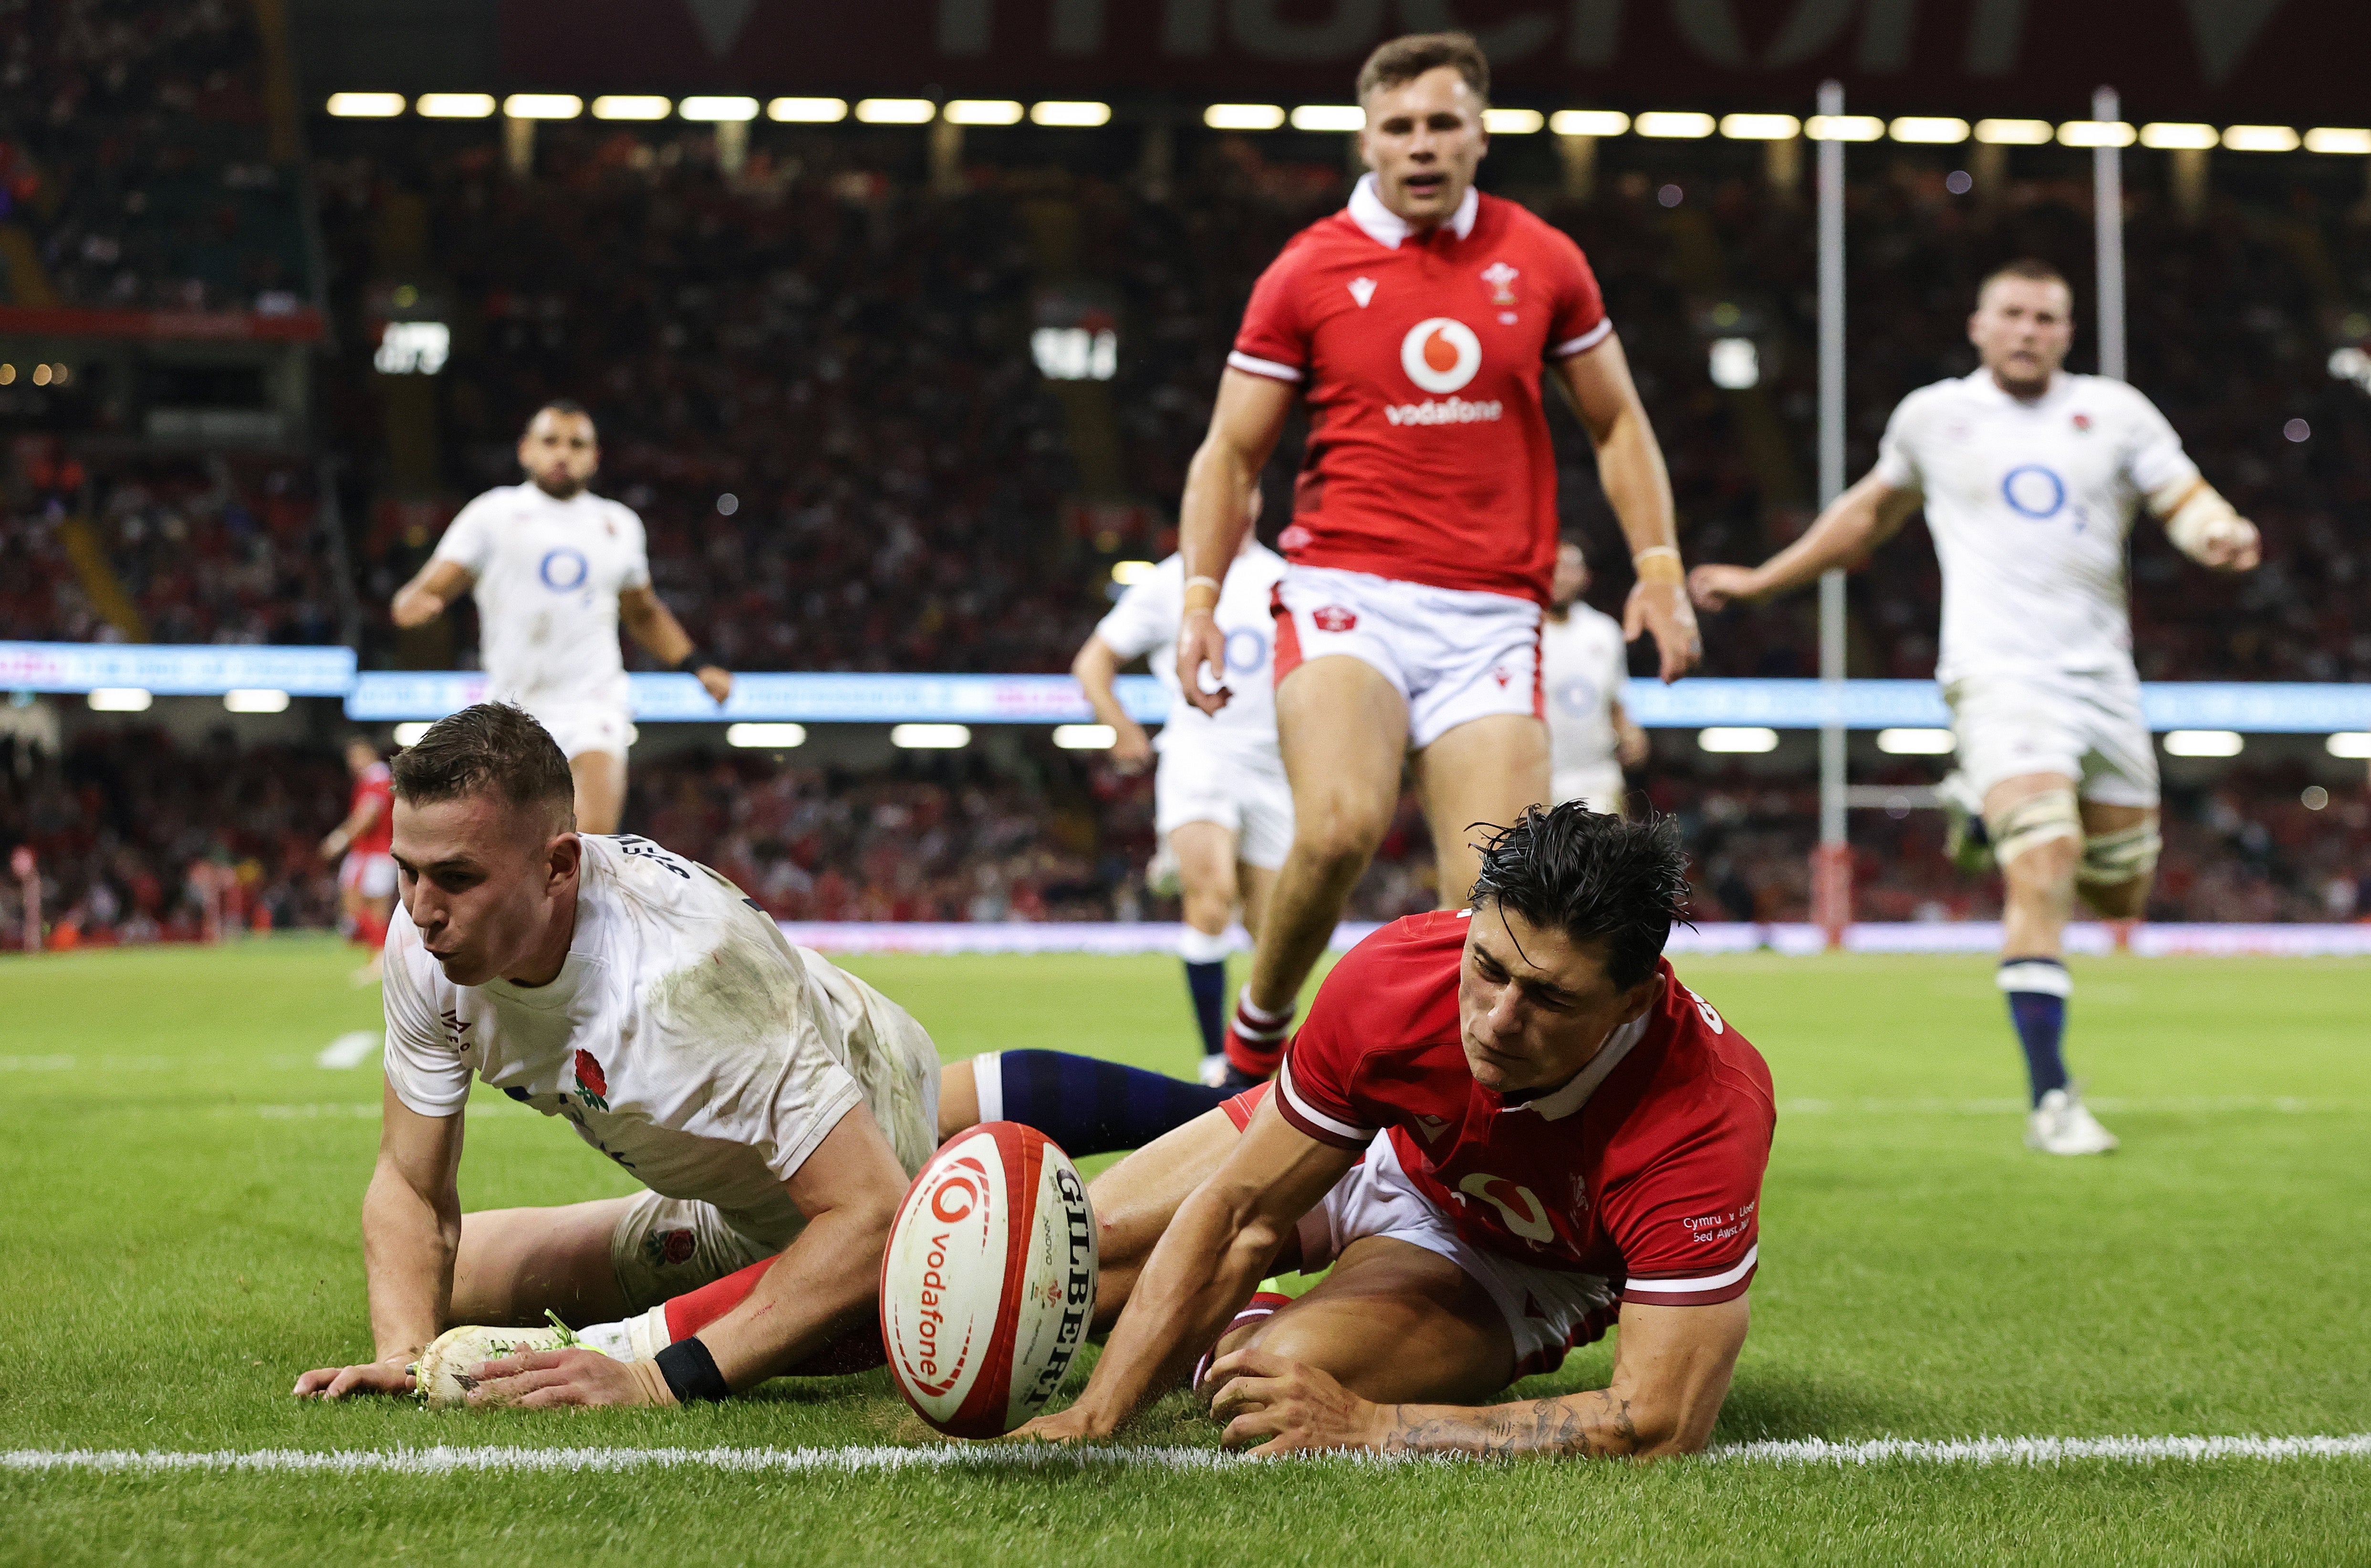 Louis Rees-Zammit narrowly missed out on scoring a late try for Wales